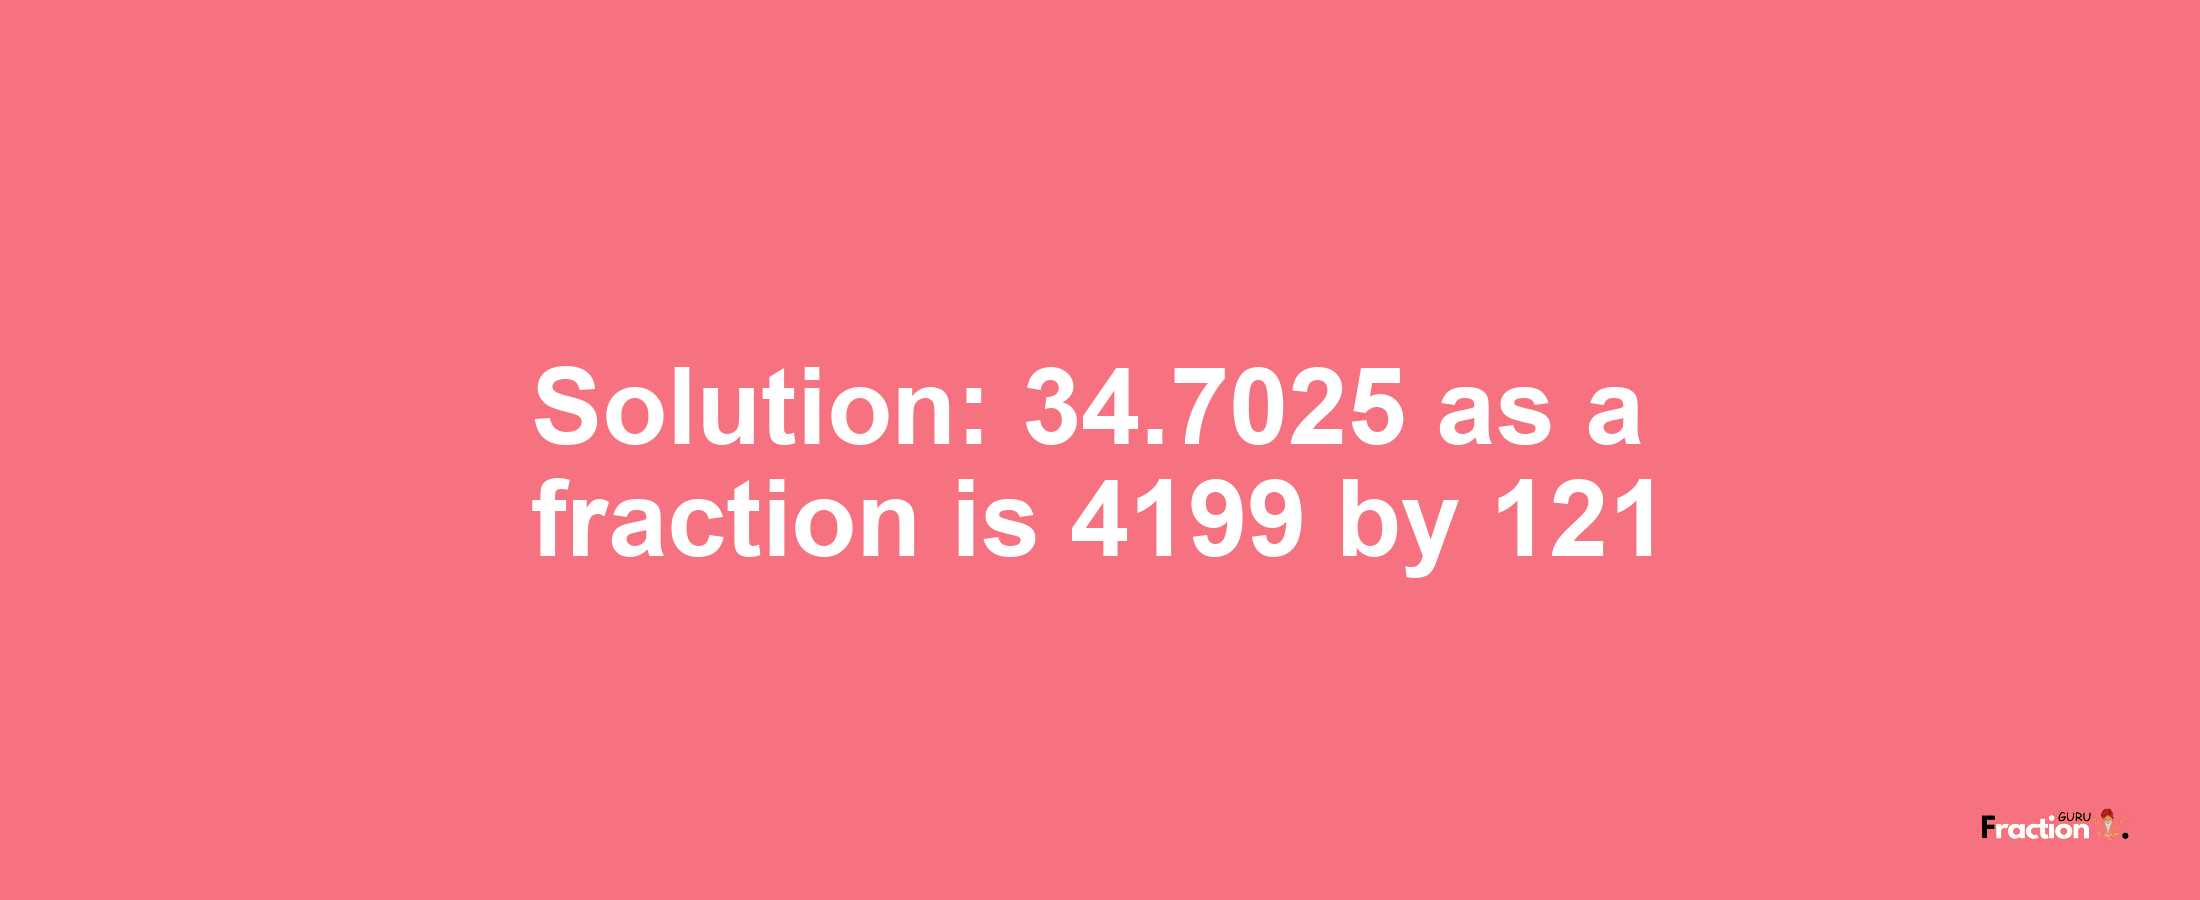 Solution:34.7025 as a fraction is 4199/121